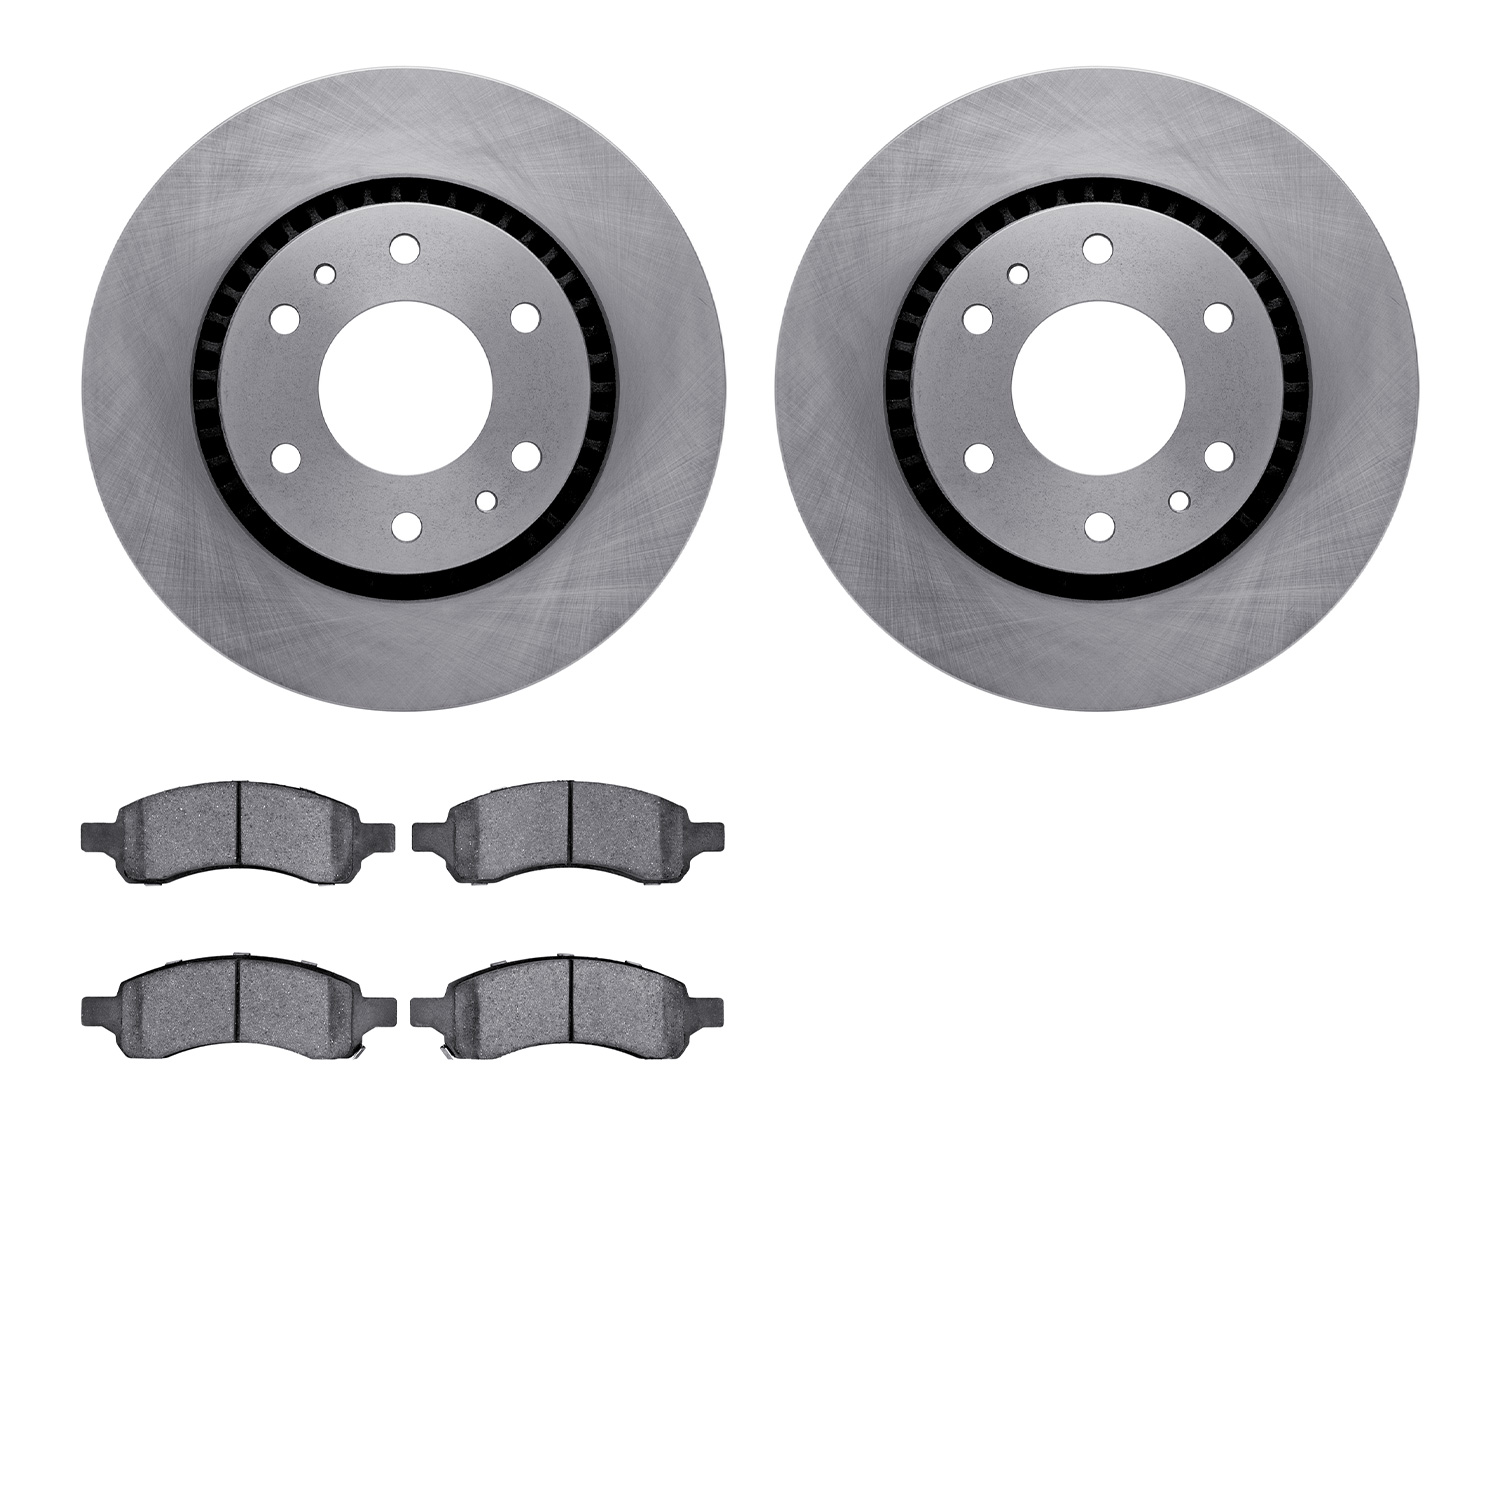 6402-48109 Brake Rotors with Ultimate-Duty Brake Pads, 2006-2009 GM, Position: Front